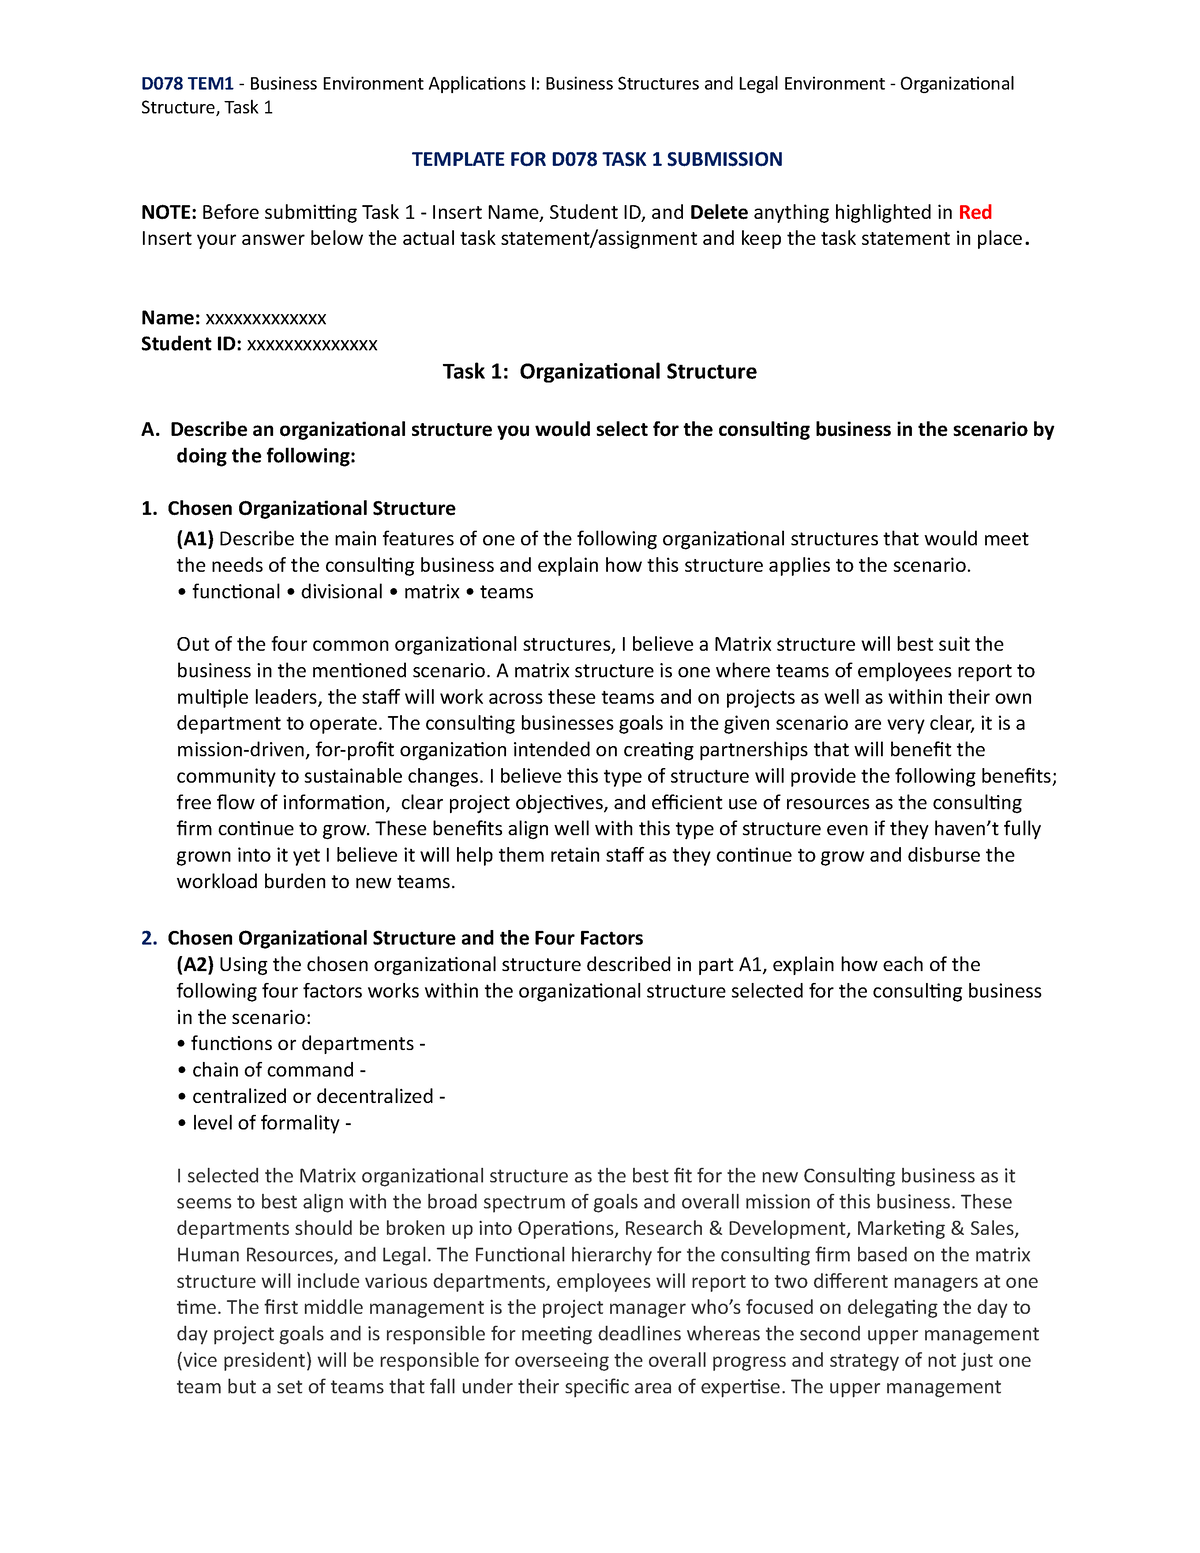 d078-task-1-template-passed-d078-tem1-business-environment